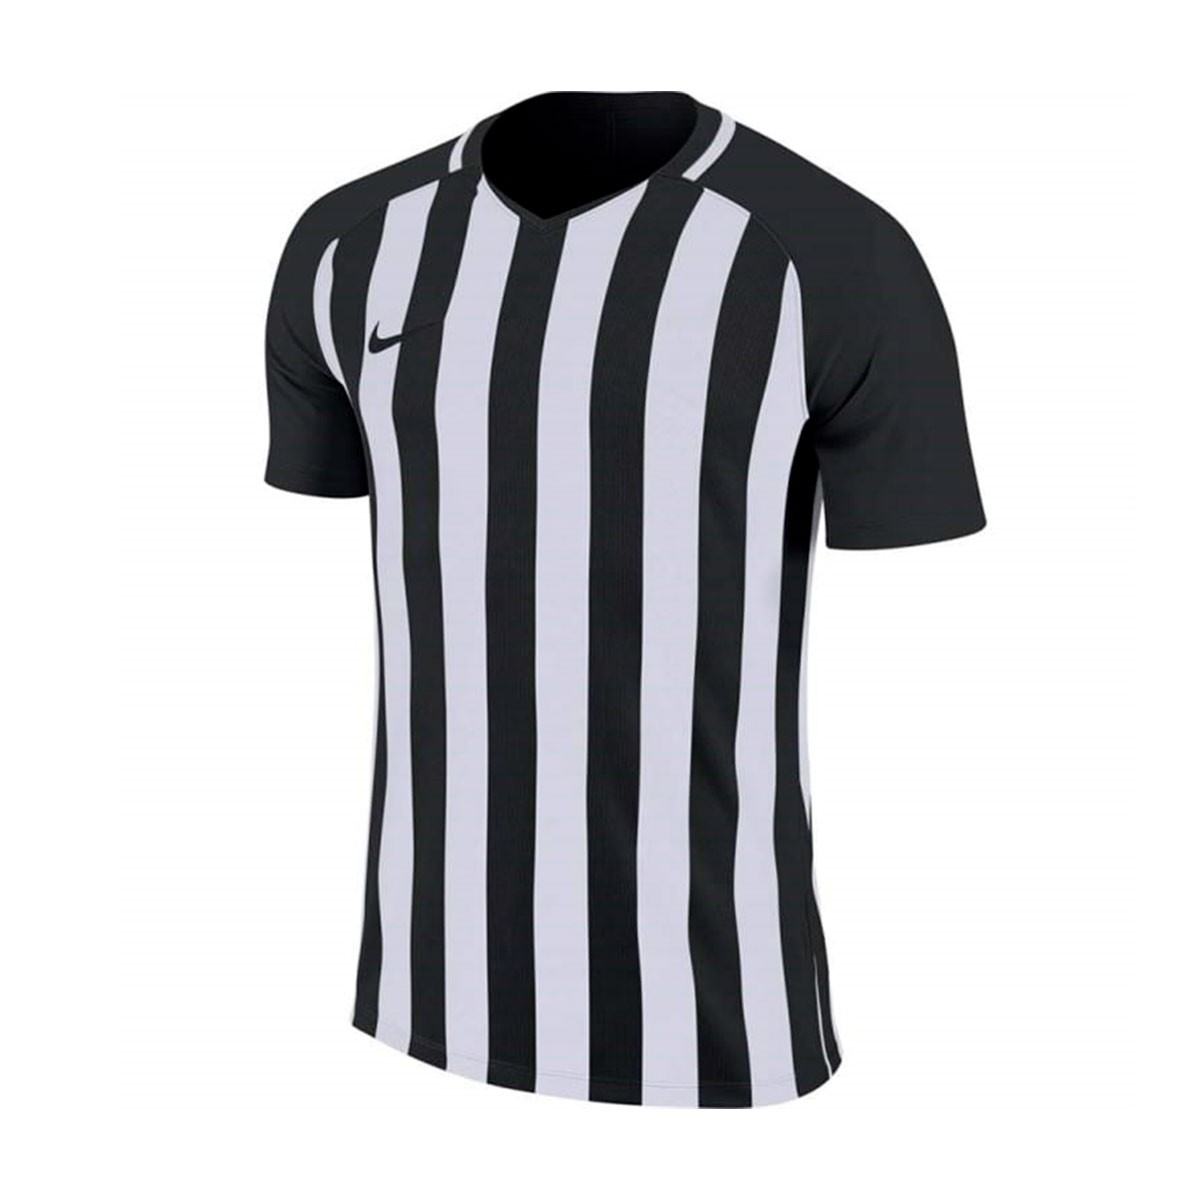 Jersey Nike Striped Division III m/c 